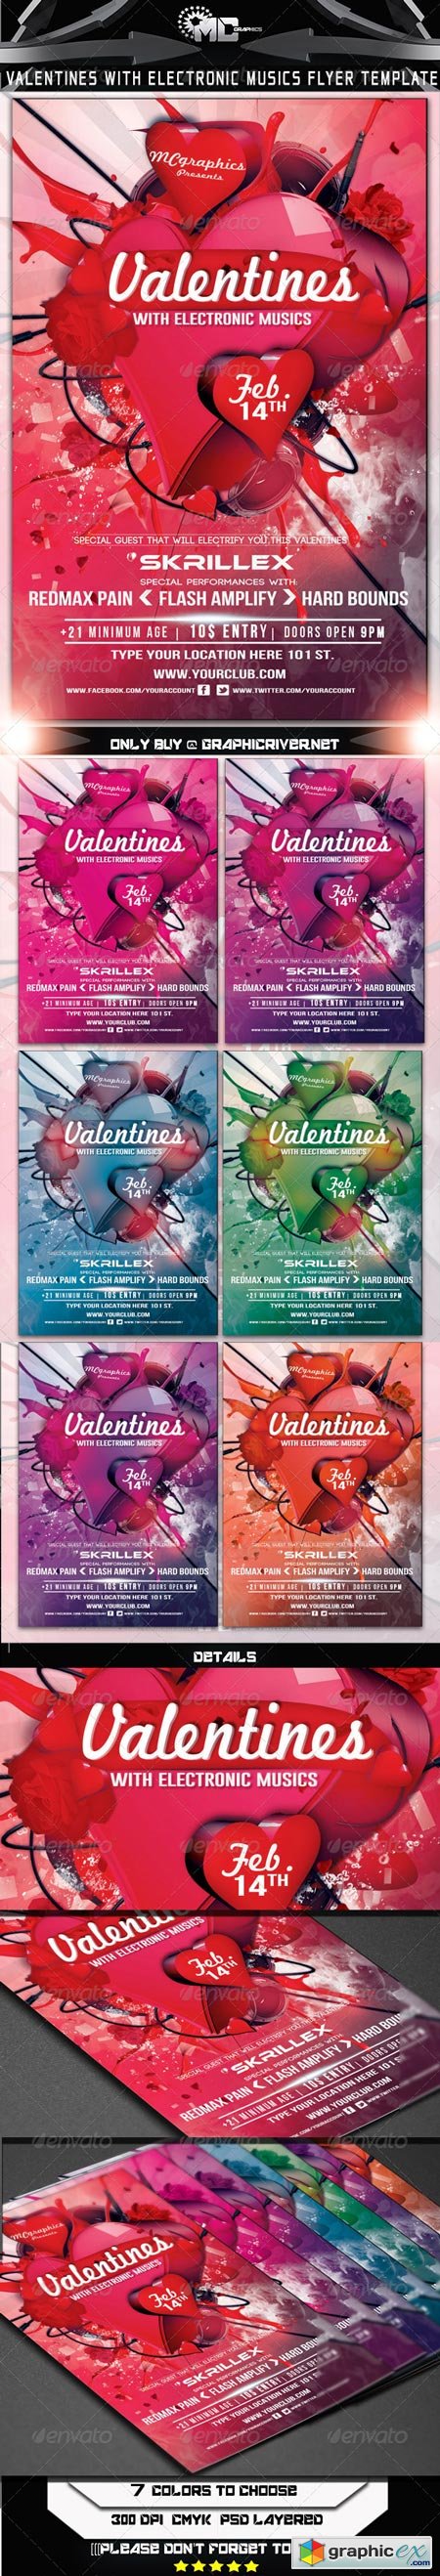 Valentines With Electronic Musics Flyer Template 6548642